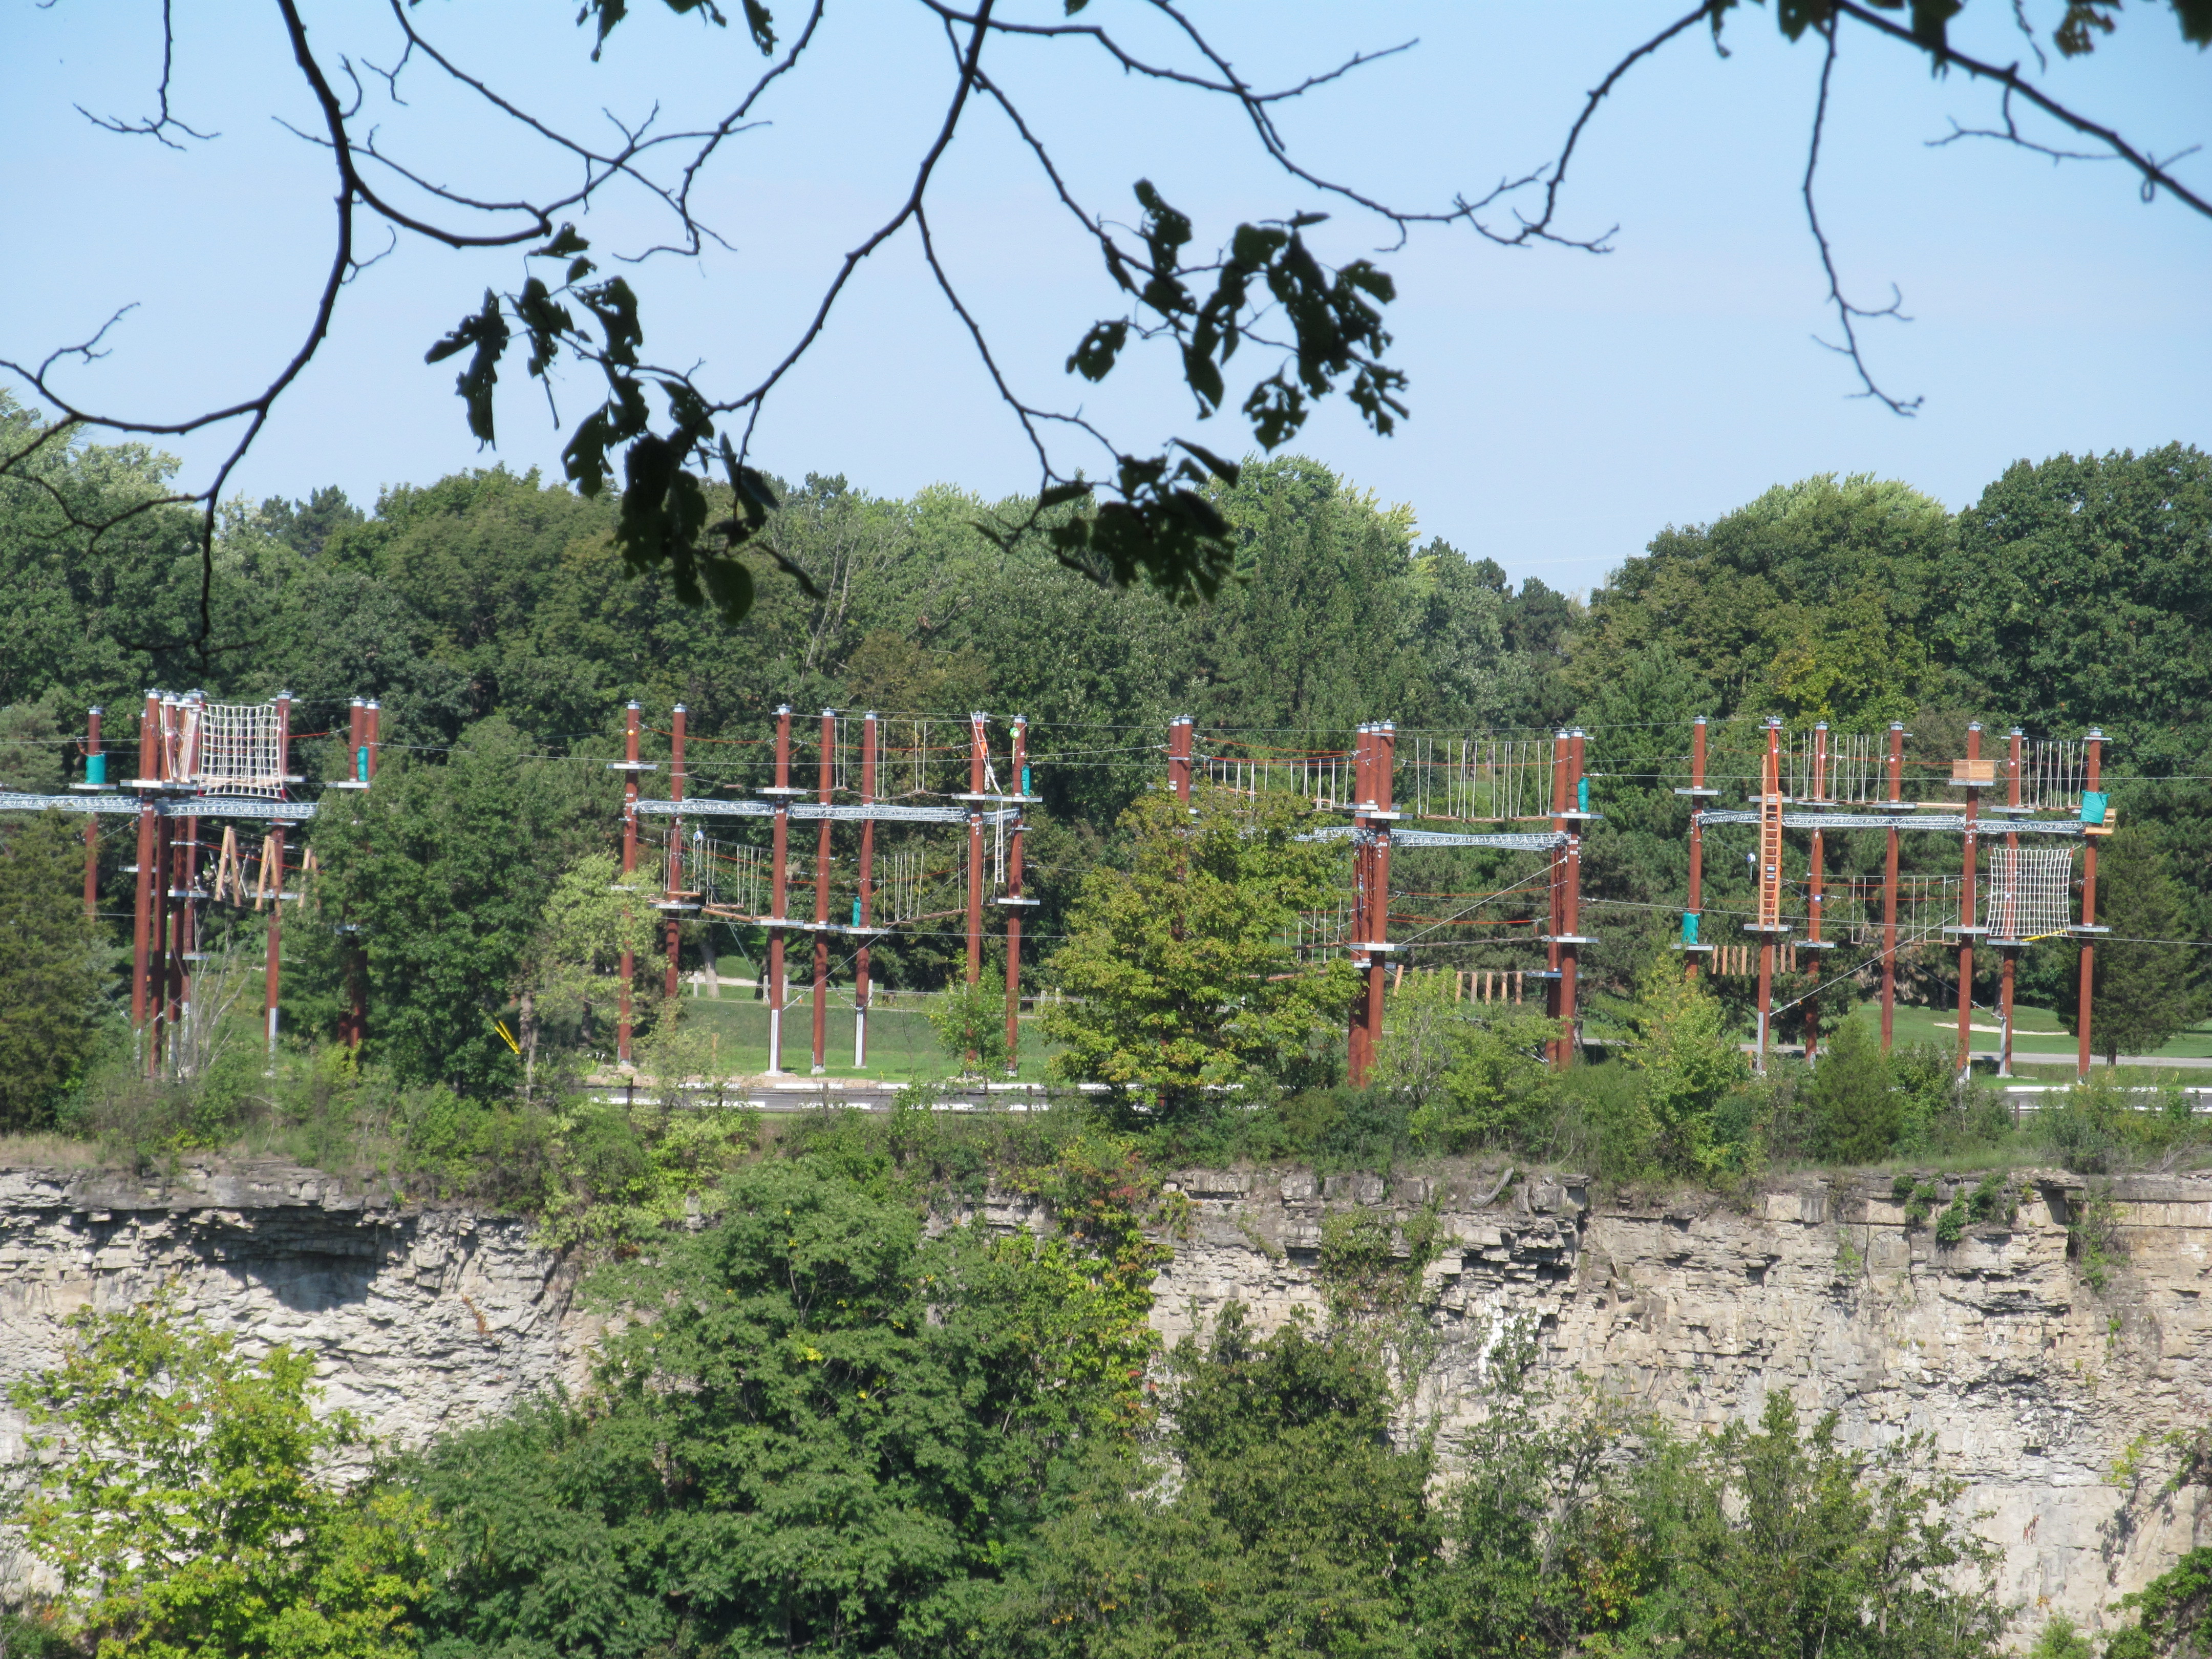 The view of Wildplay's new extreme playground as seen from Whirlpool State Park on the US side.